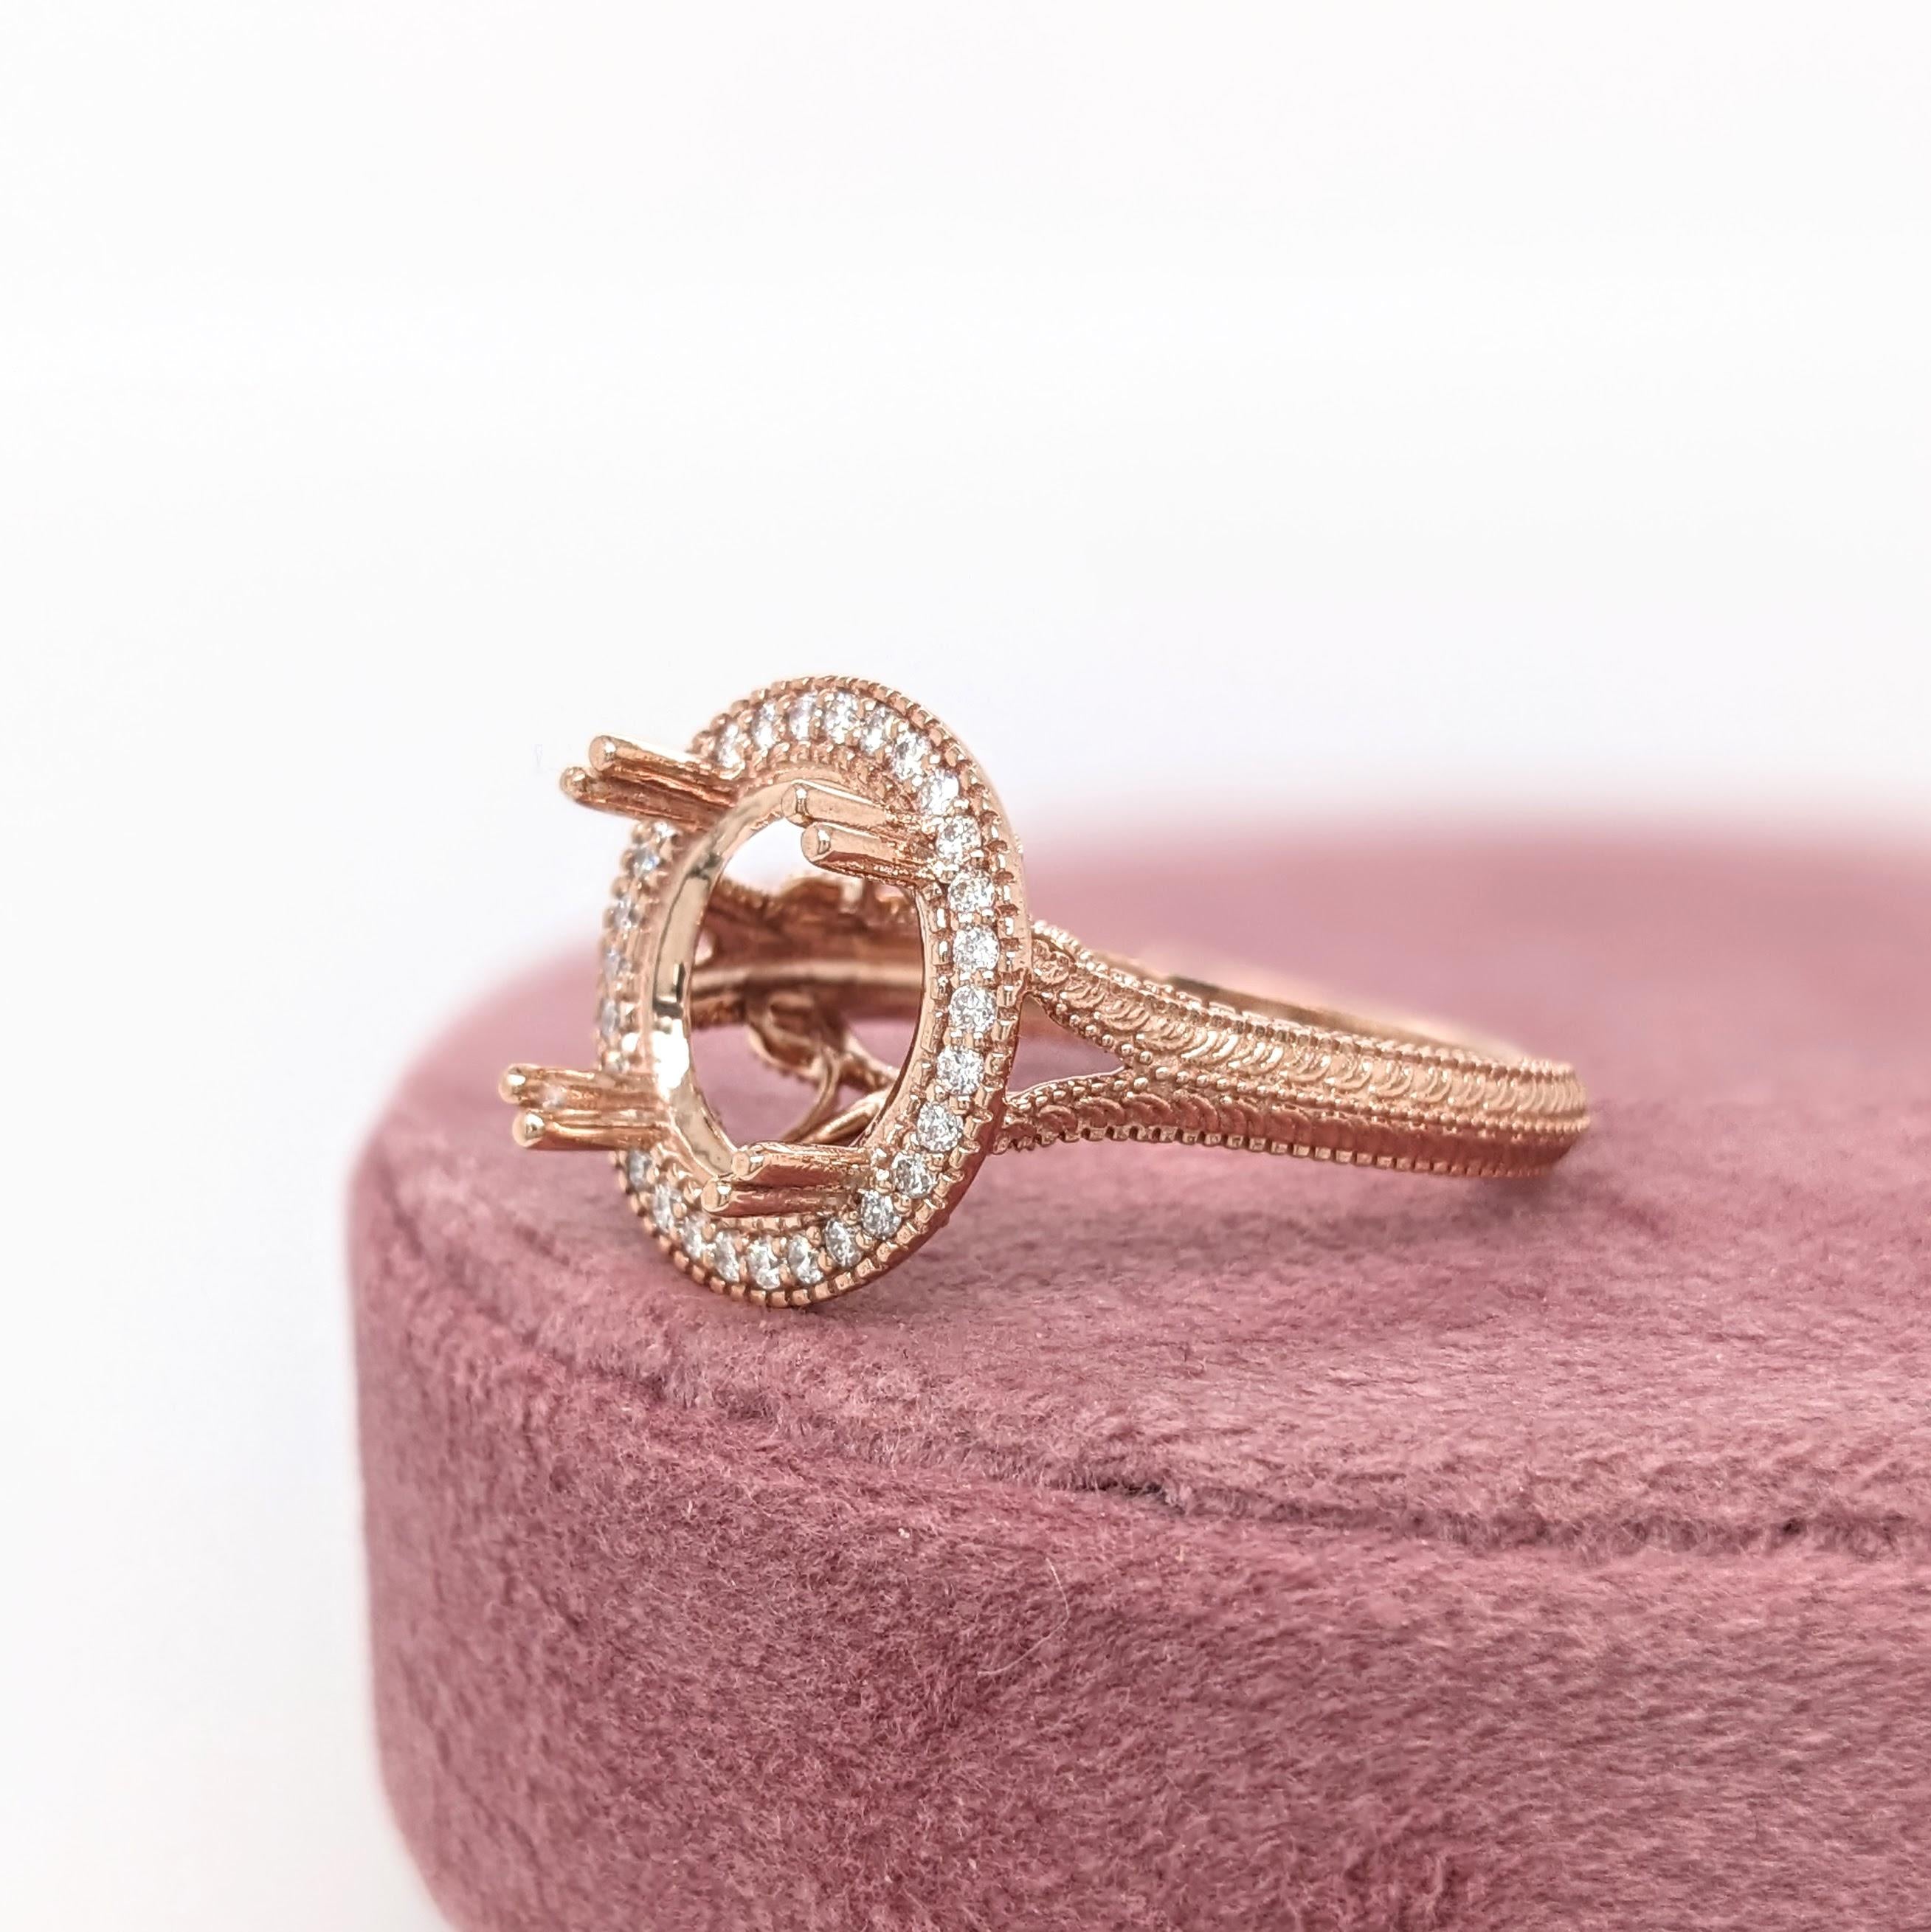 Statement Ring Semi Mount w Earth Mined Diamonds in Solid 14K Gold Round 11mm